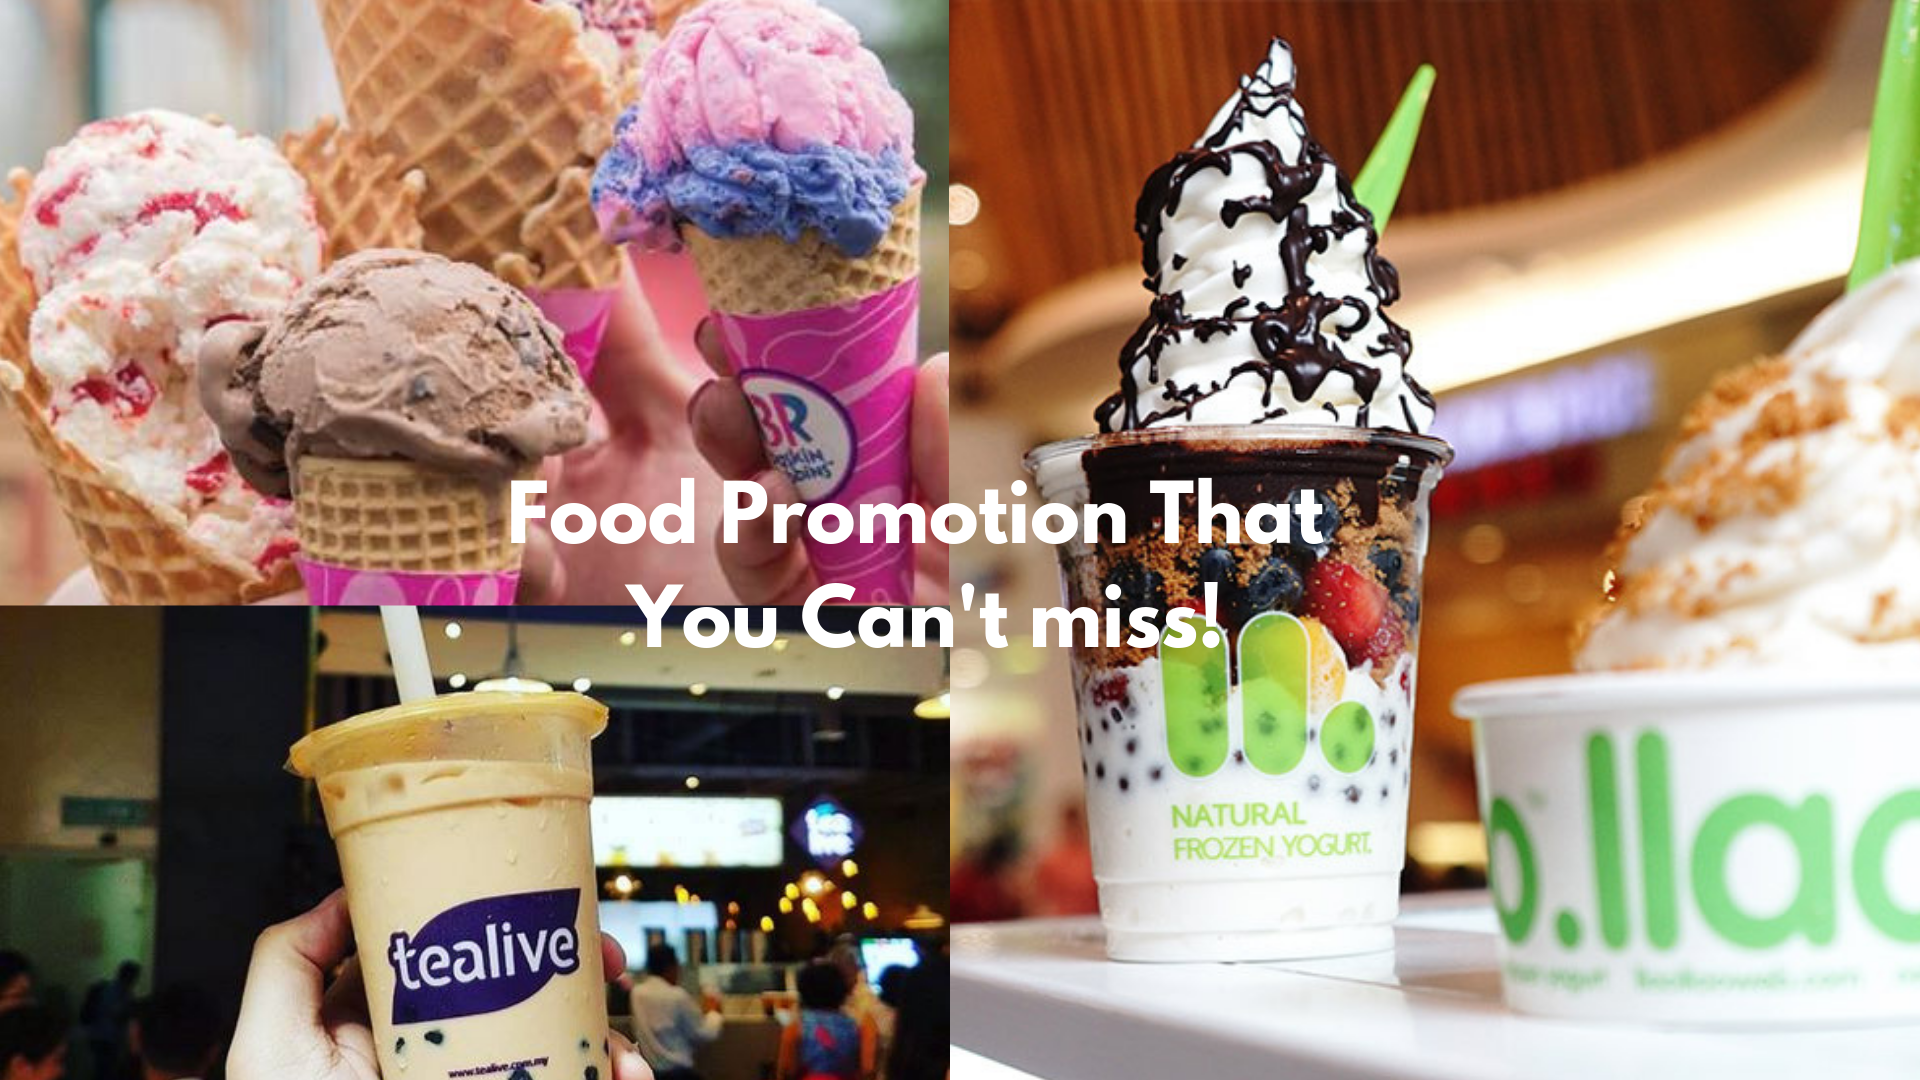 Food-Promotion-That-You-Cant-miss - LifeStyle 